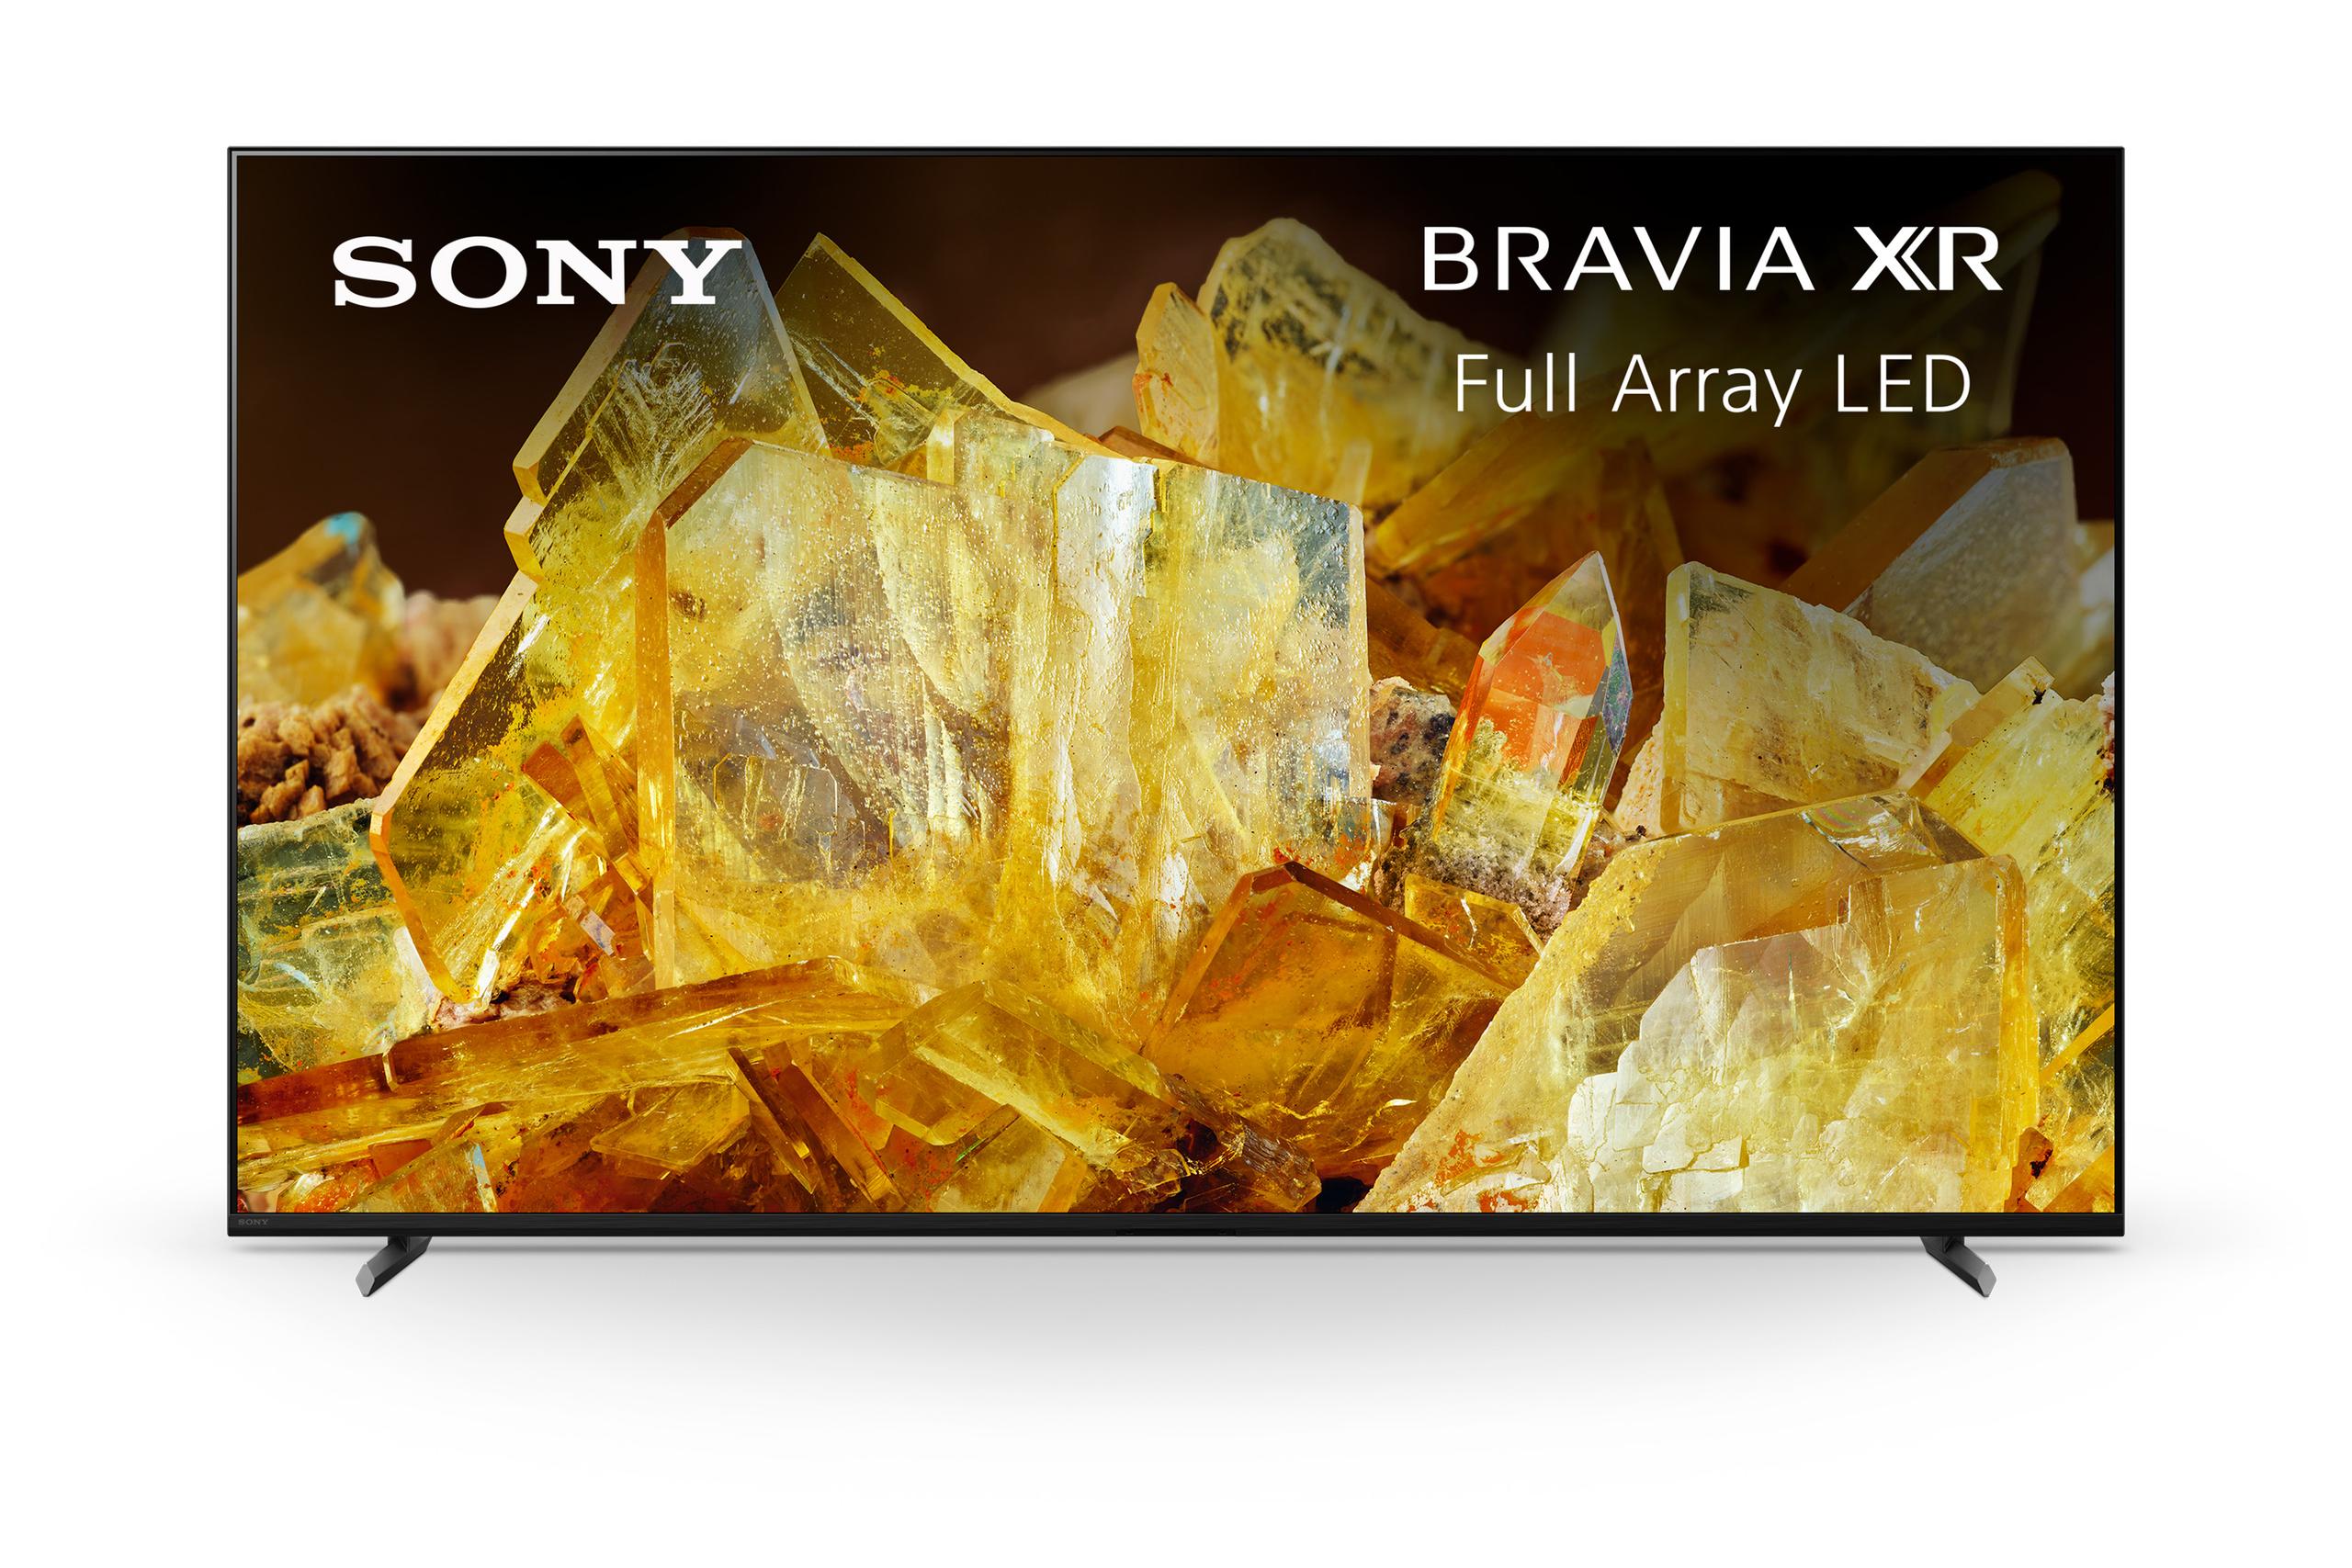 Witness a new level of home entertainment with these BRAVIA XR models by Sony! 662da25e 01 x90l 55 65 sony bravia xr frnt